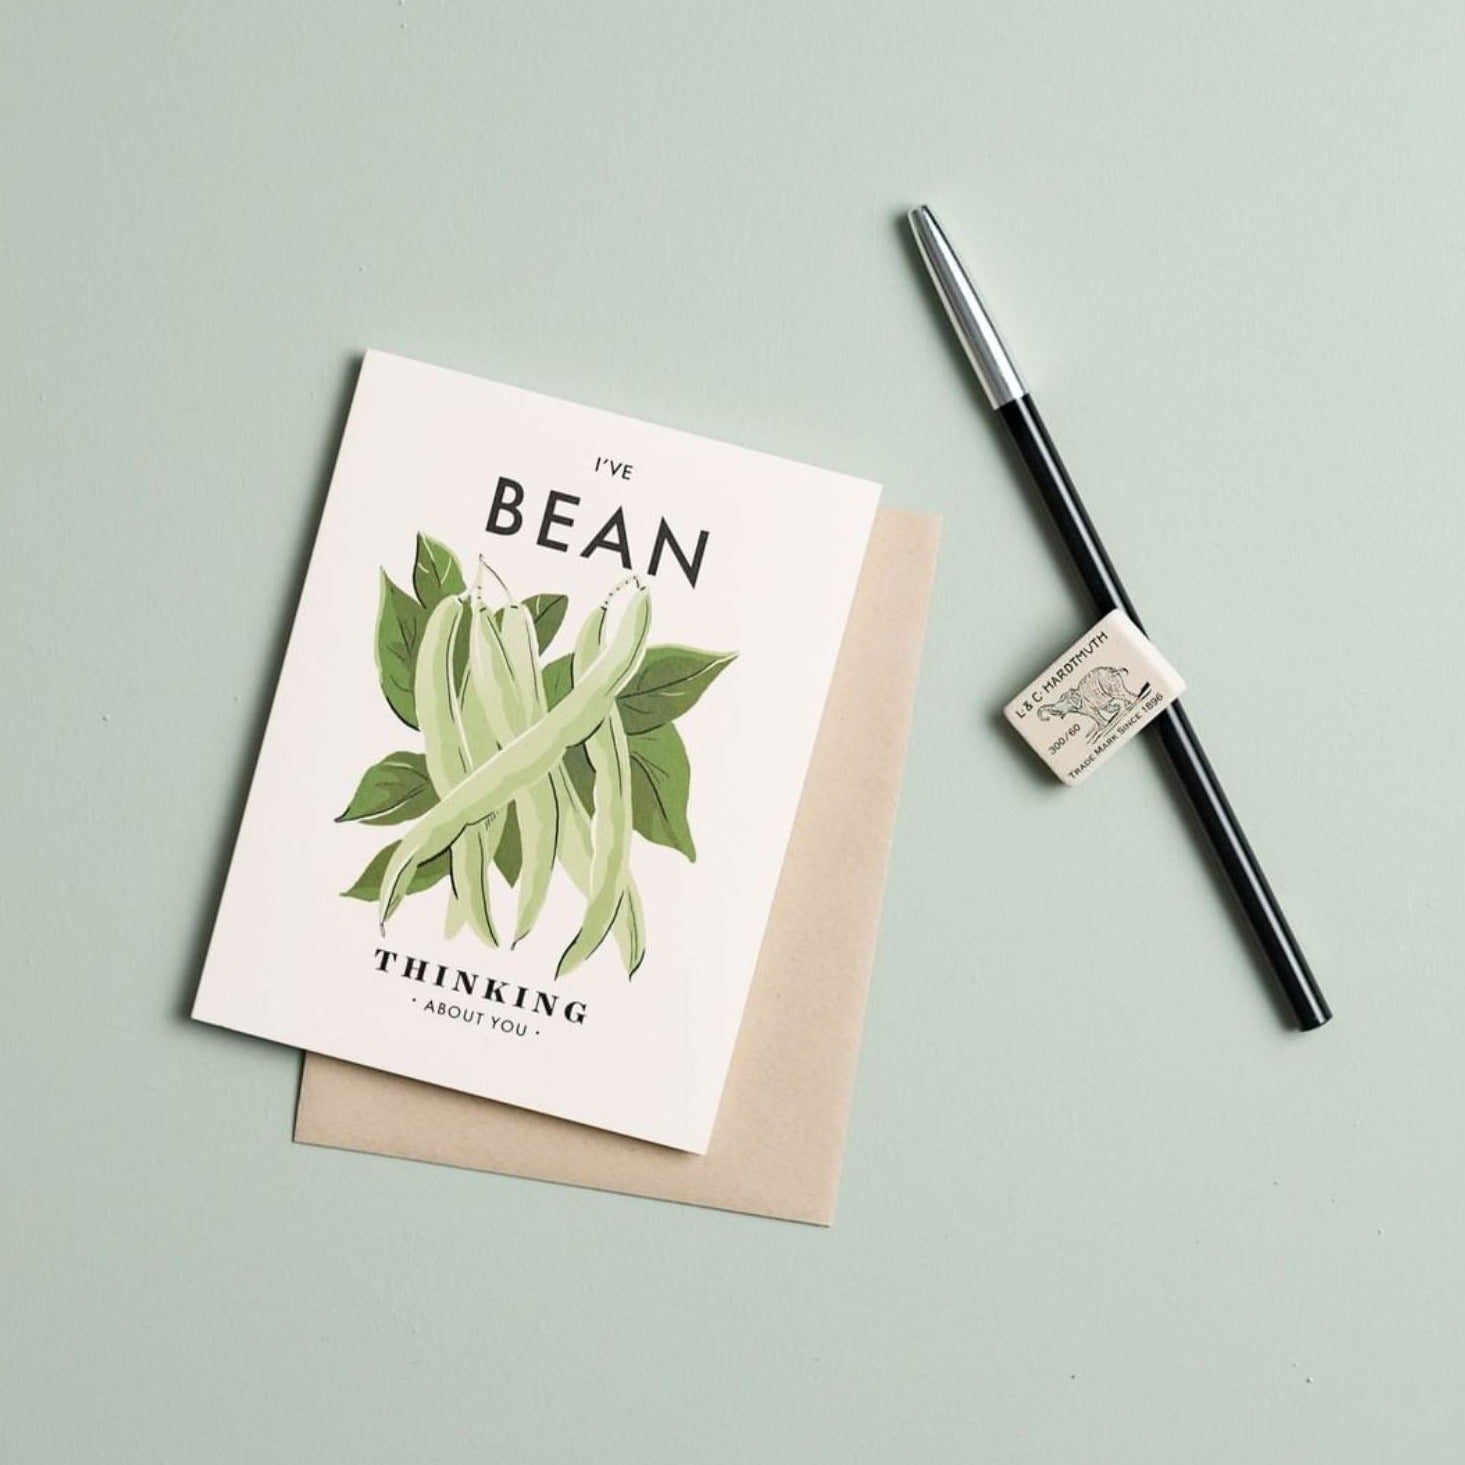 Illustrated 'Thinking About You' card sitting on a pale green background next to a pen and eraser, the card featuring a bunch of beans and the text 'I've Bean Thinking About You.'